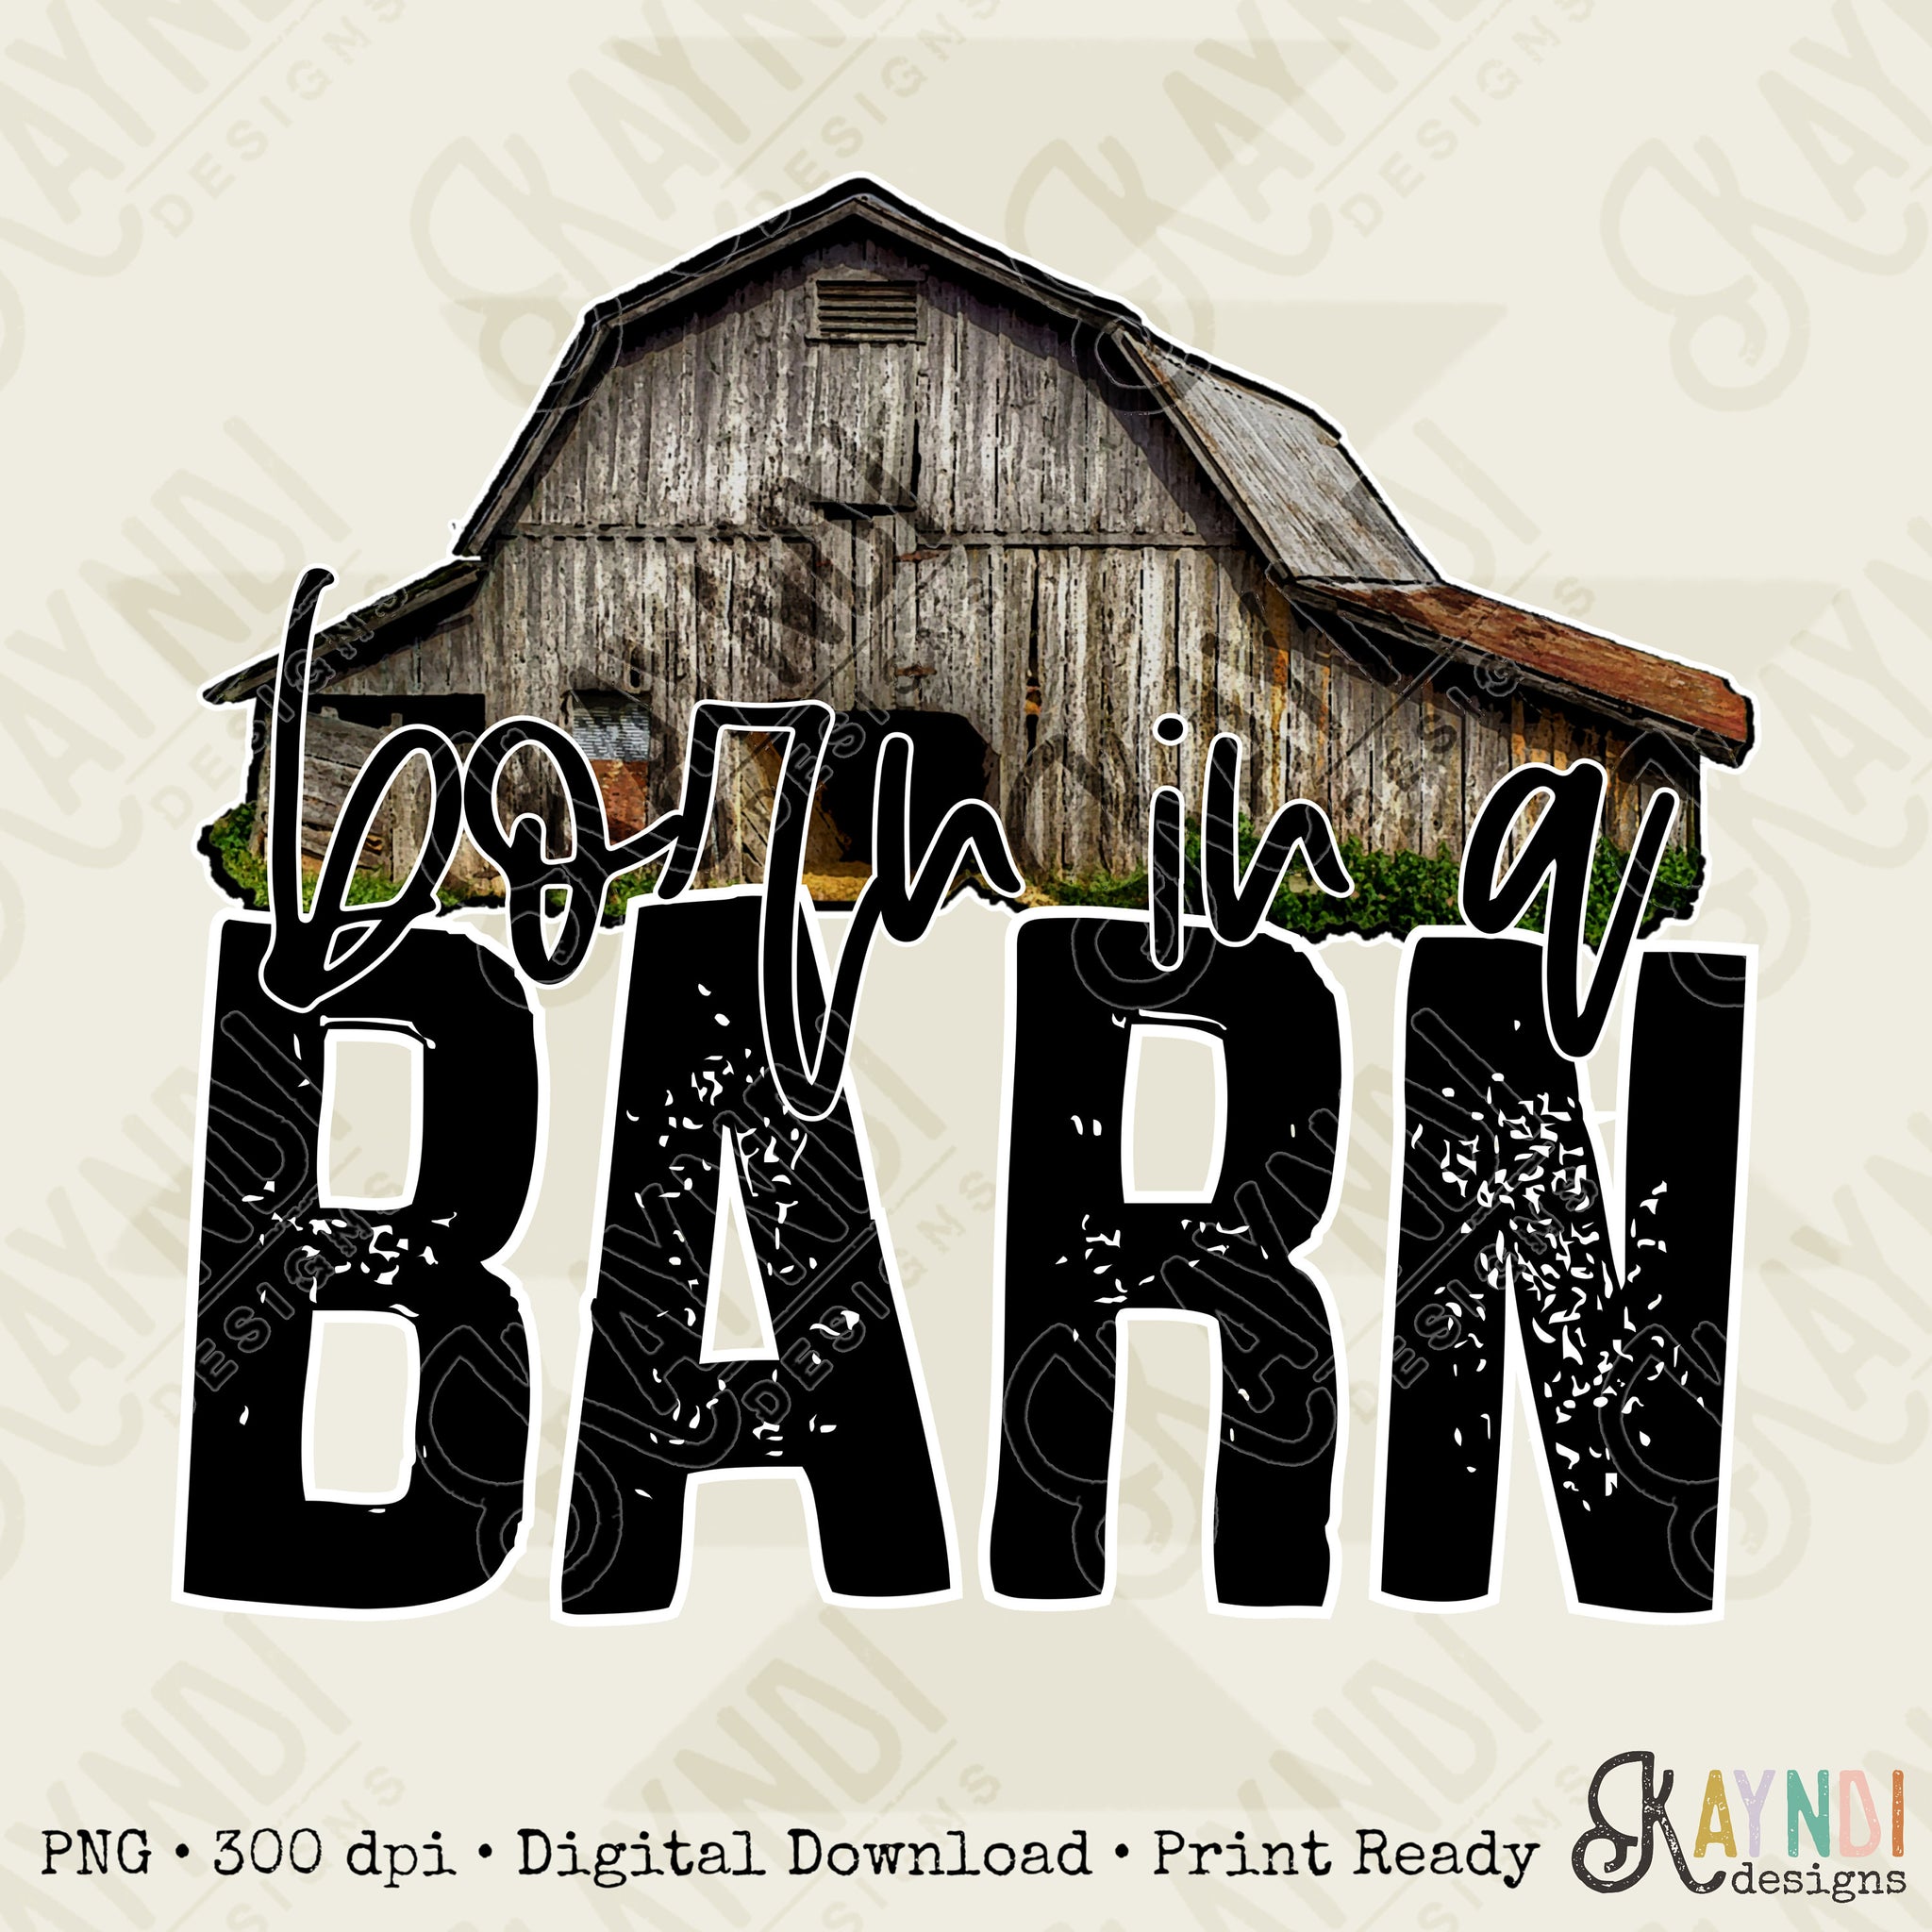 Born In a Barn Sublimation Design PNG Digital Download Printable Country Western Southern Farm Farmer Saying Quote